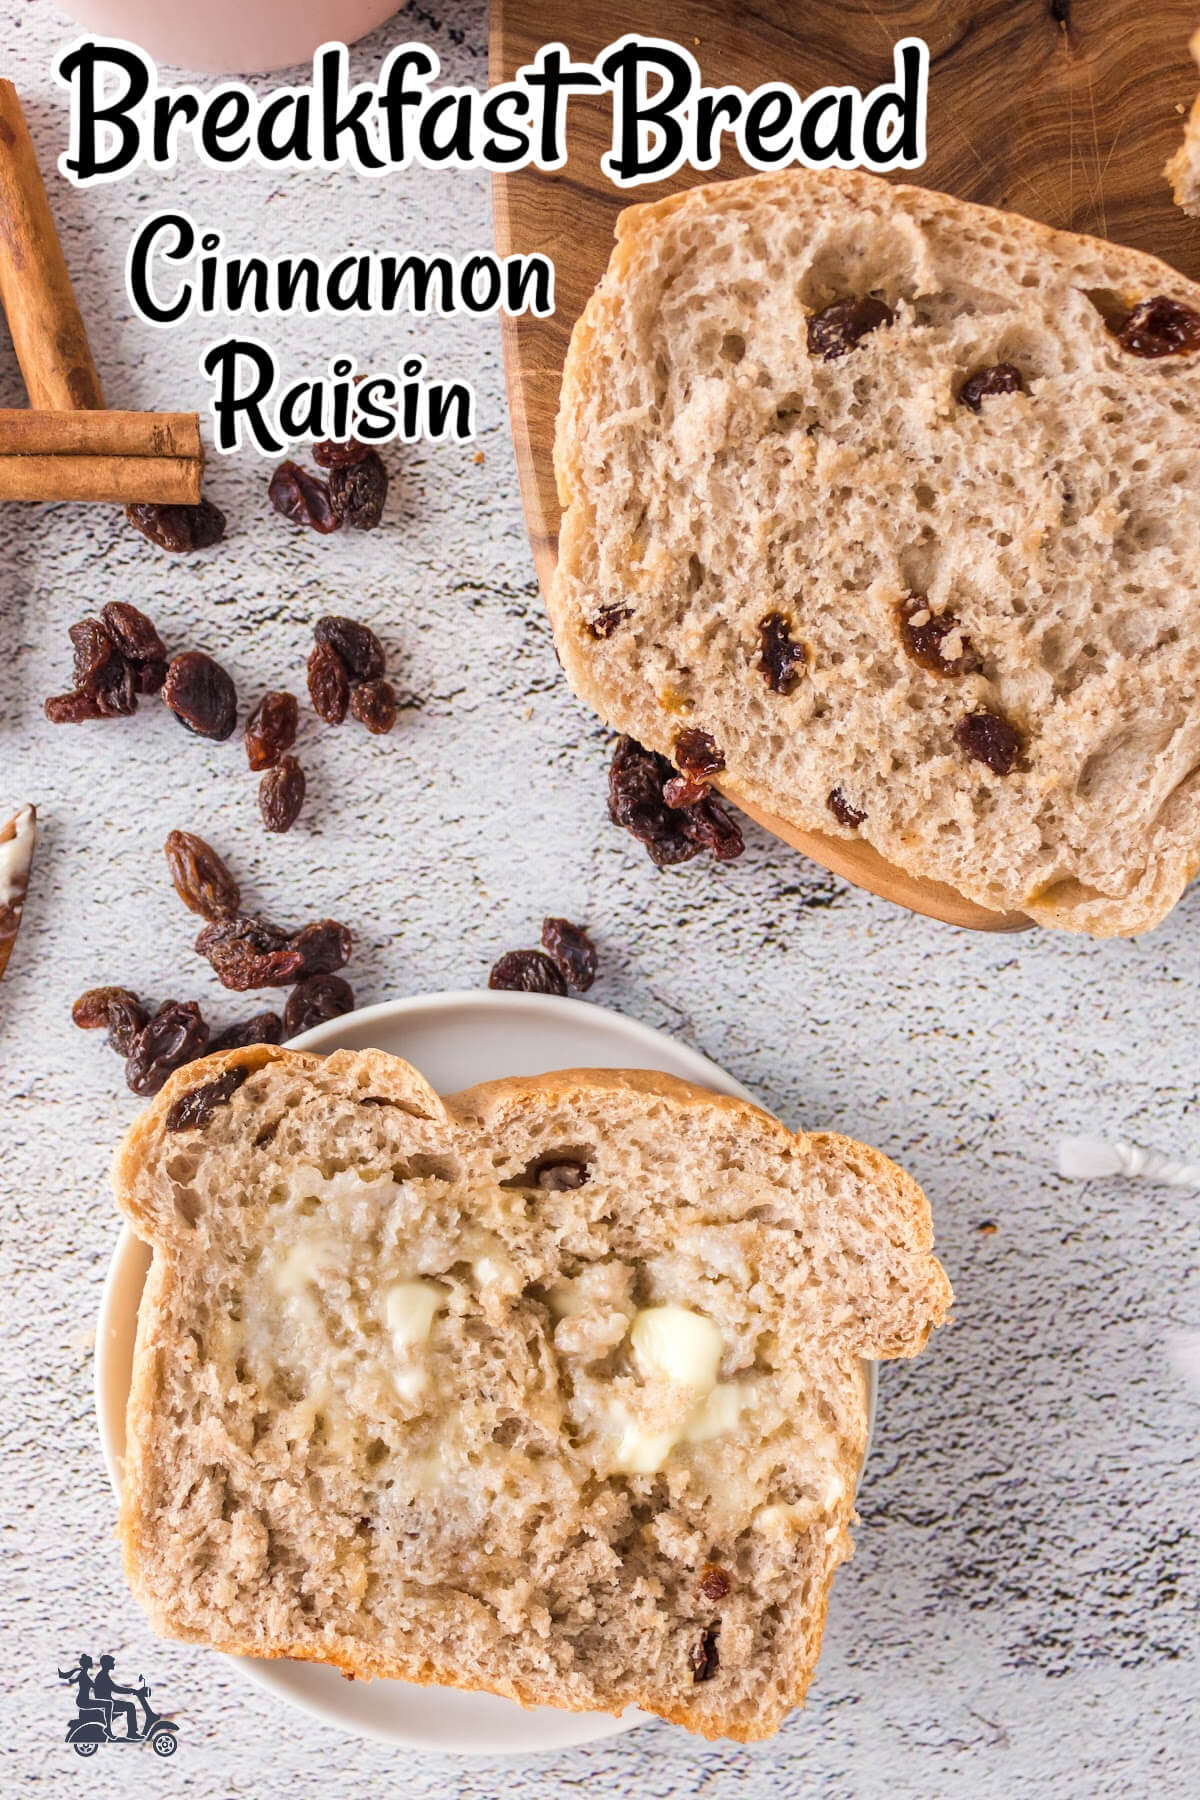 Slices of Homemade cinnamon raisin bread with butter.